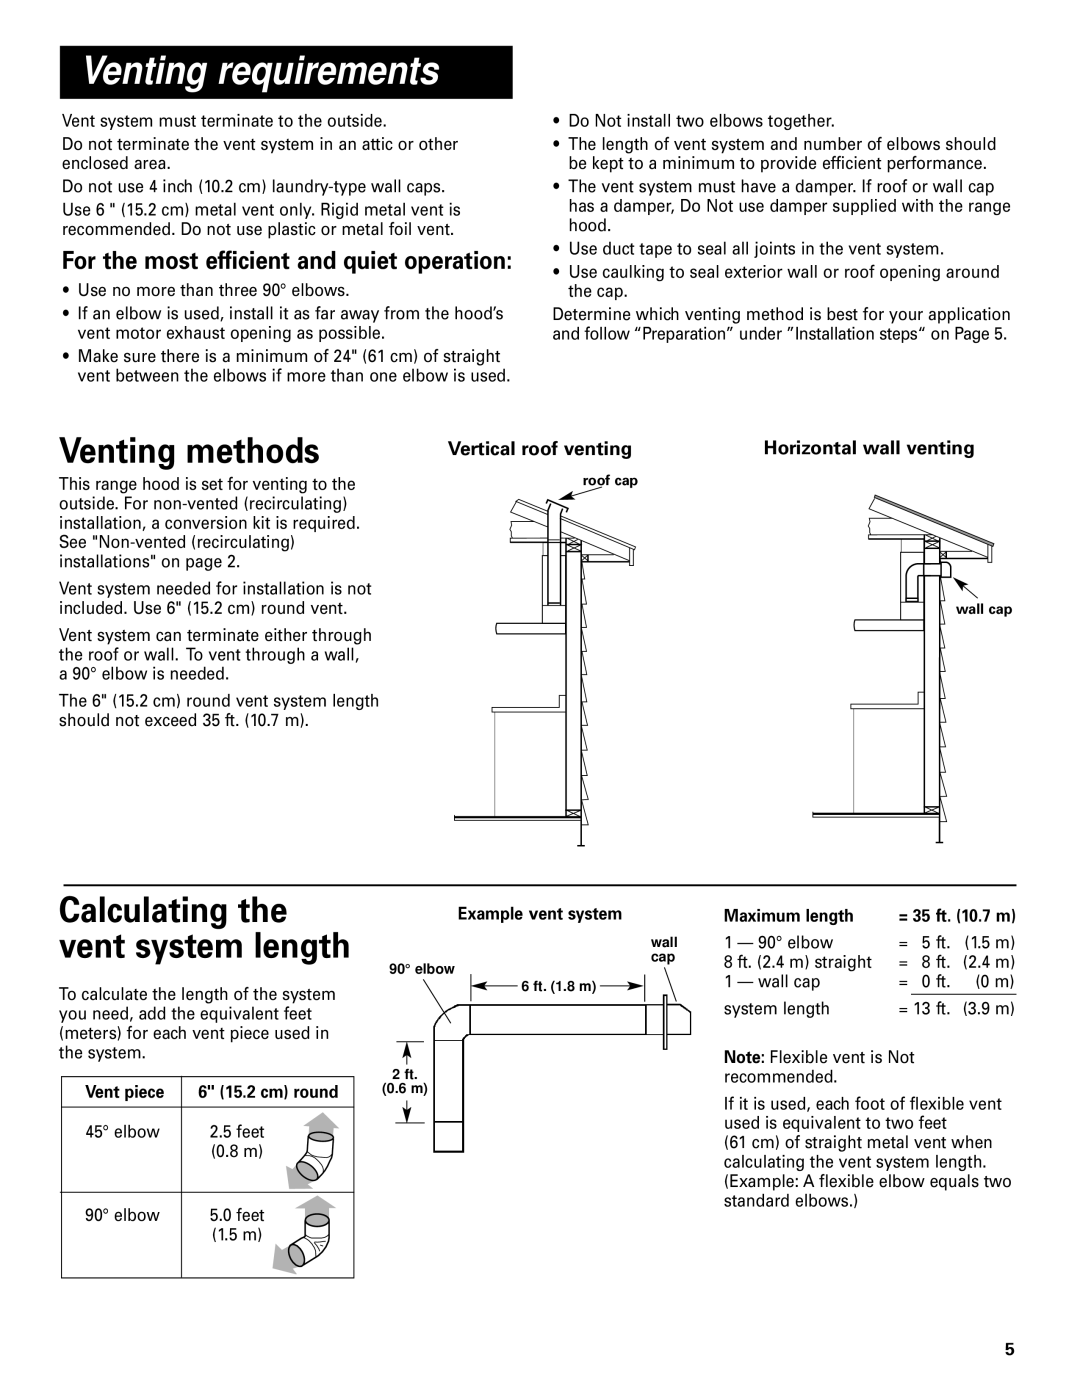 KitchenAid Pro Line Series Venting requirements, Venting methods, Calculating the vent system length, Vent piece 